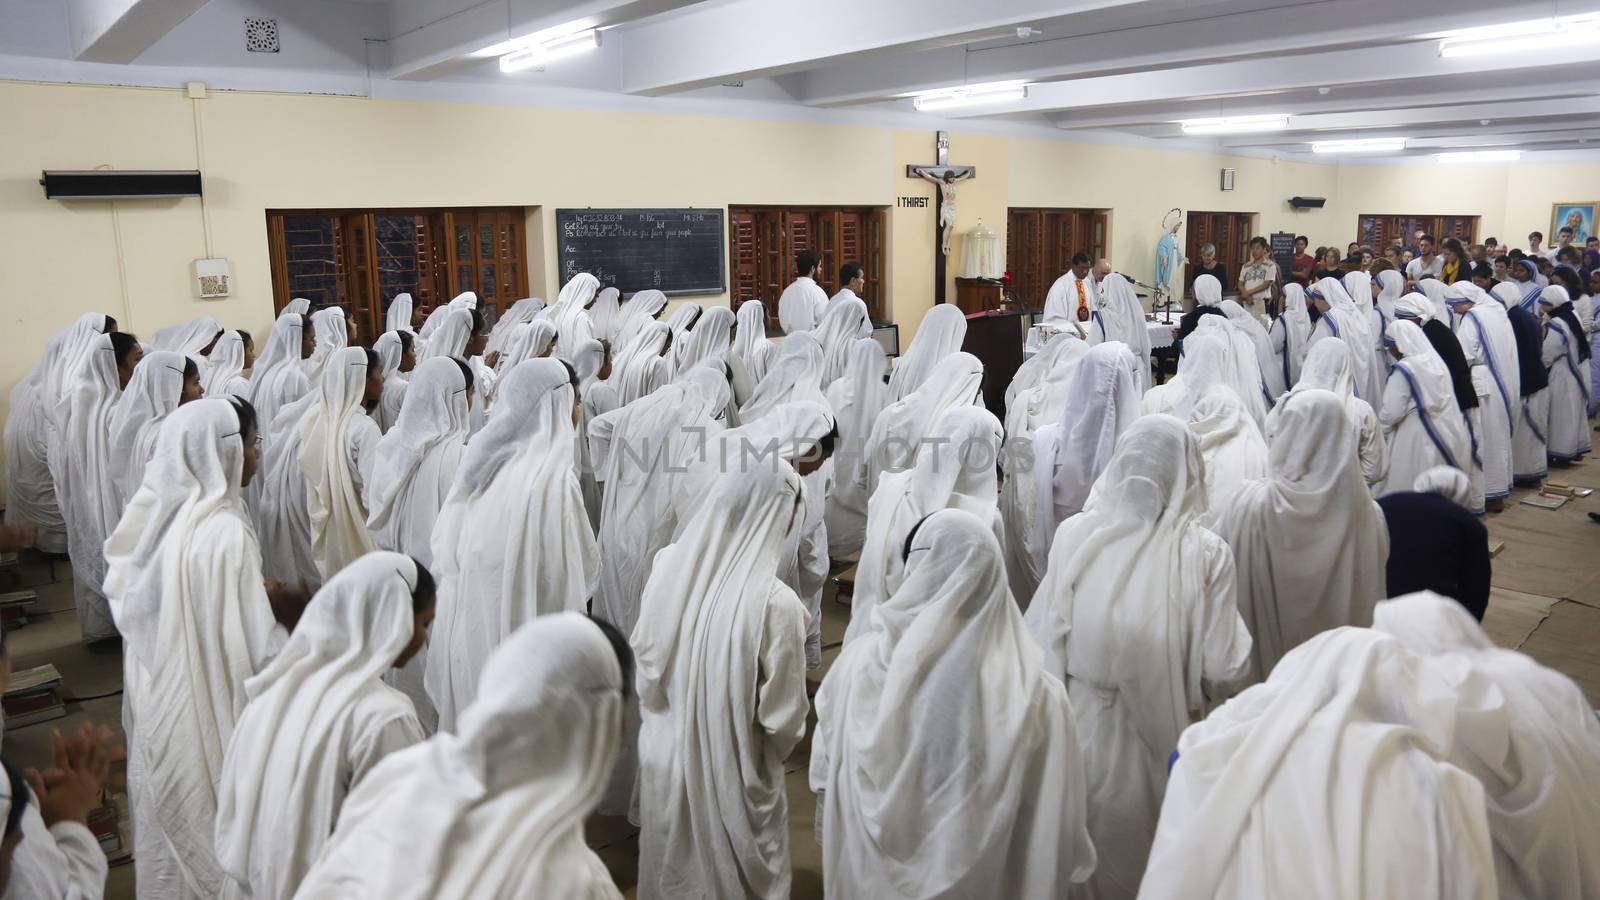 Sisters of Mother Teresa's Missionaries of Charity at the Mass in the chapel of the Mother House, Kolkata by atlas